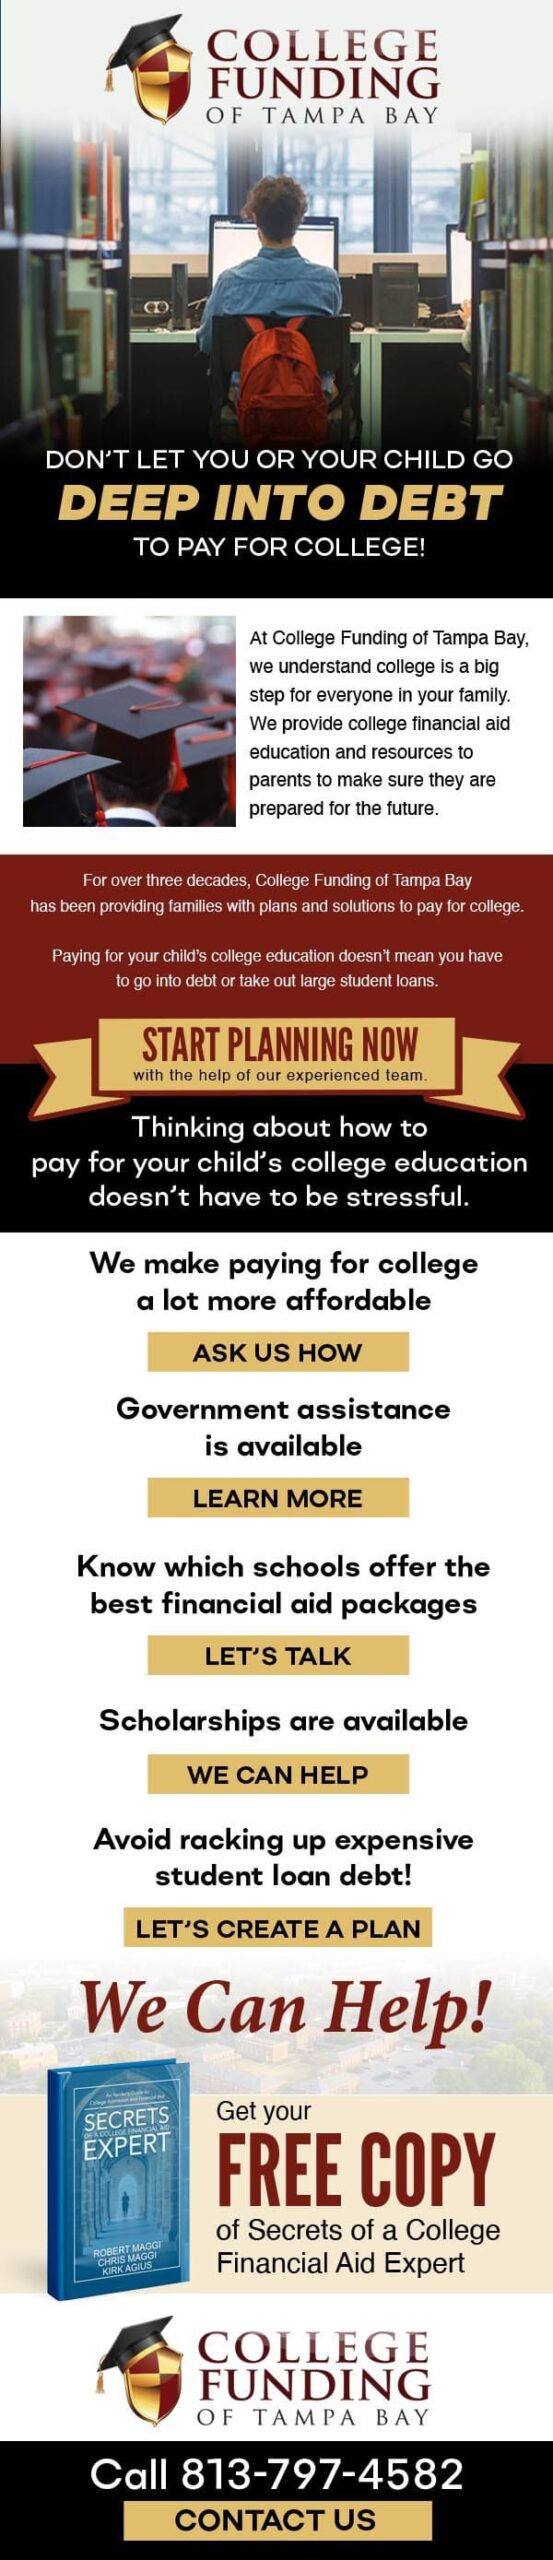 College Funding Email